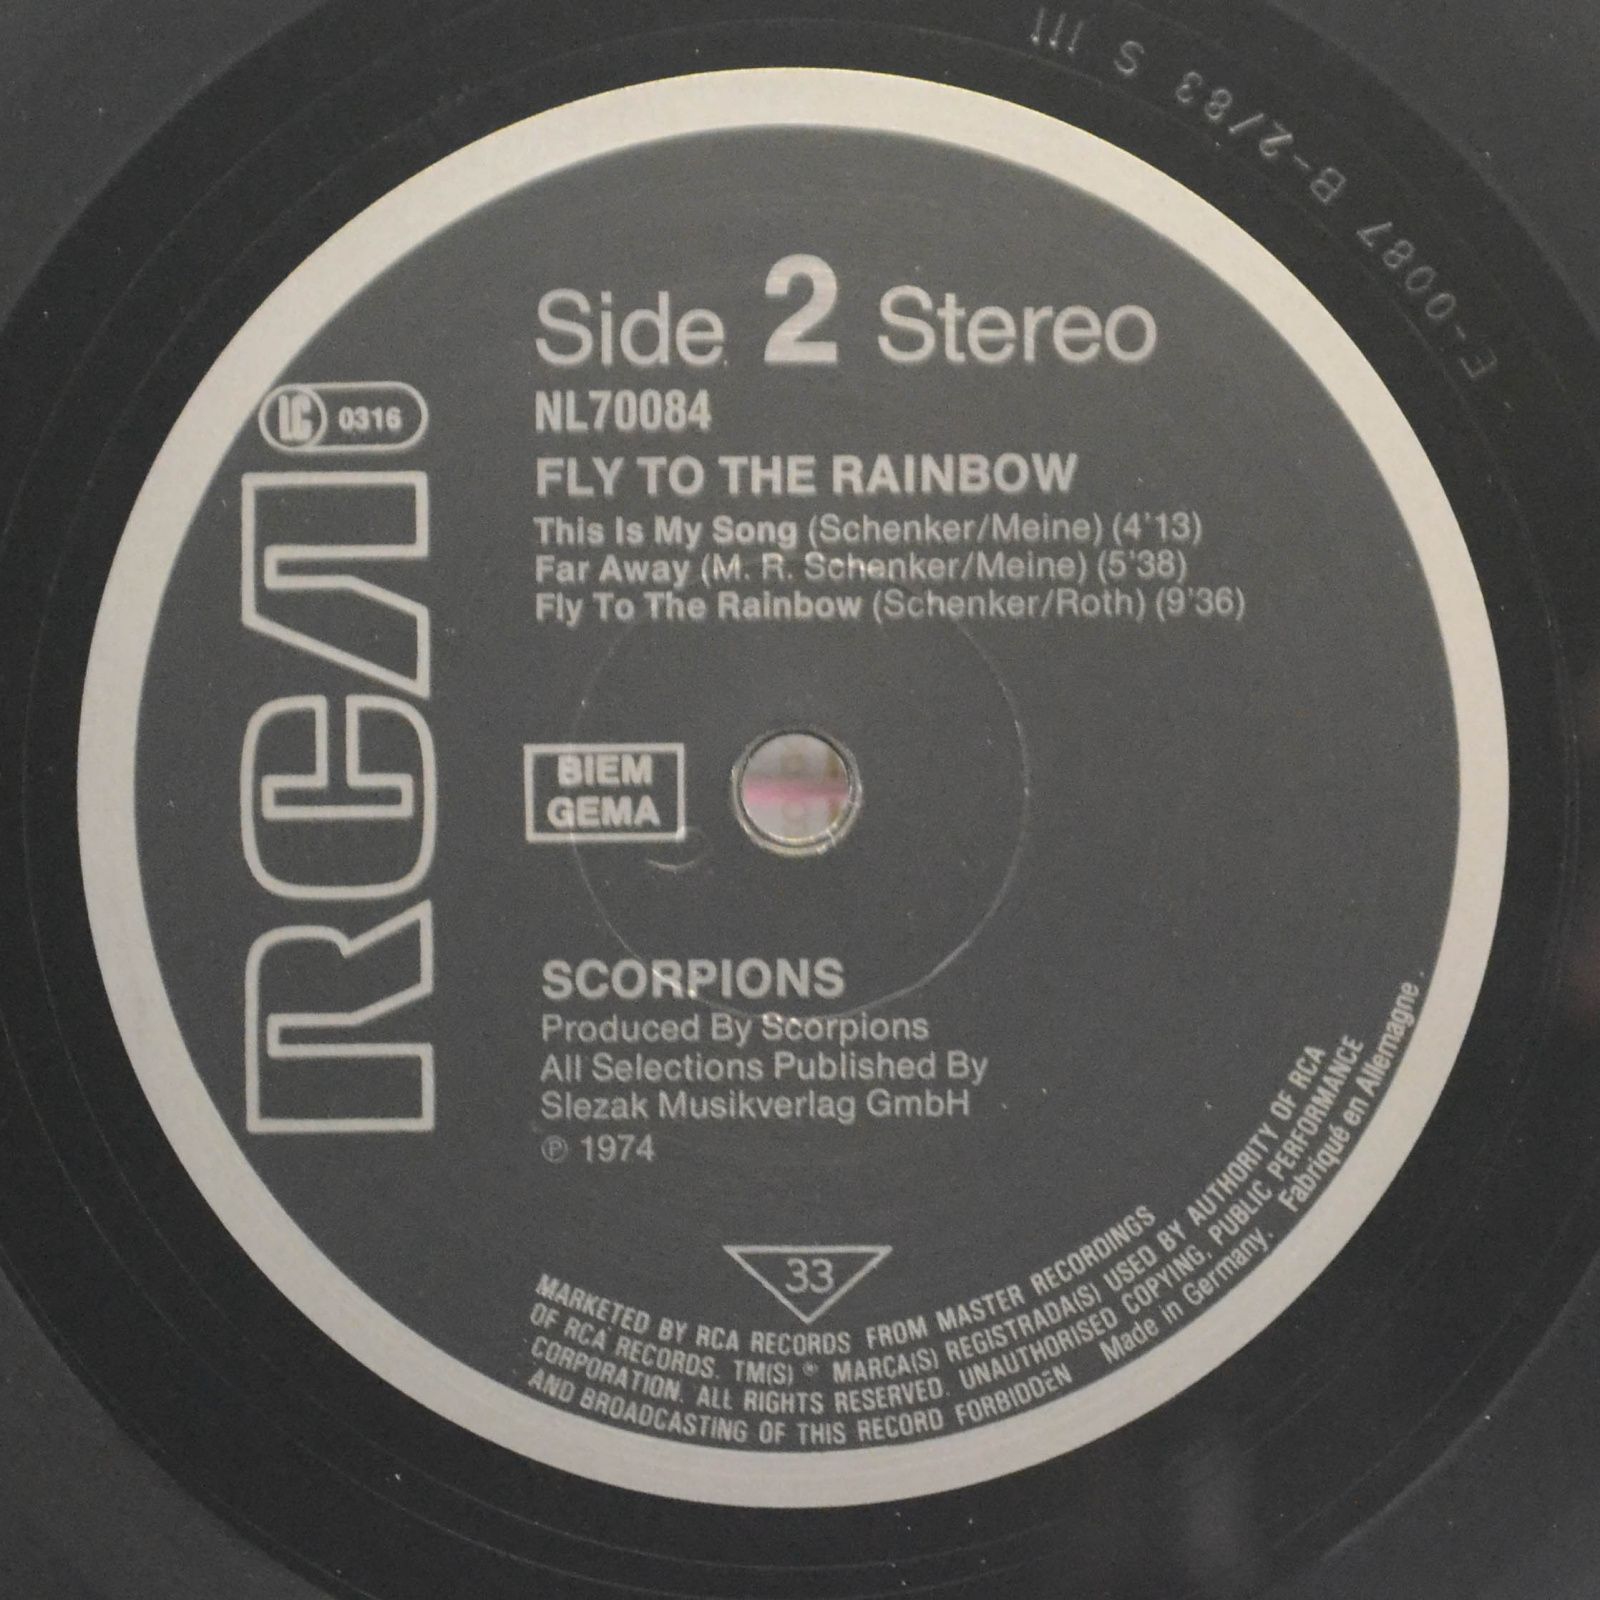 Scorpions — Fly To The Rainbow, 1983